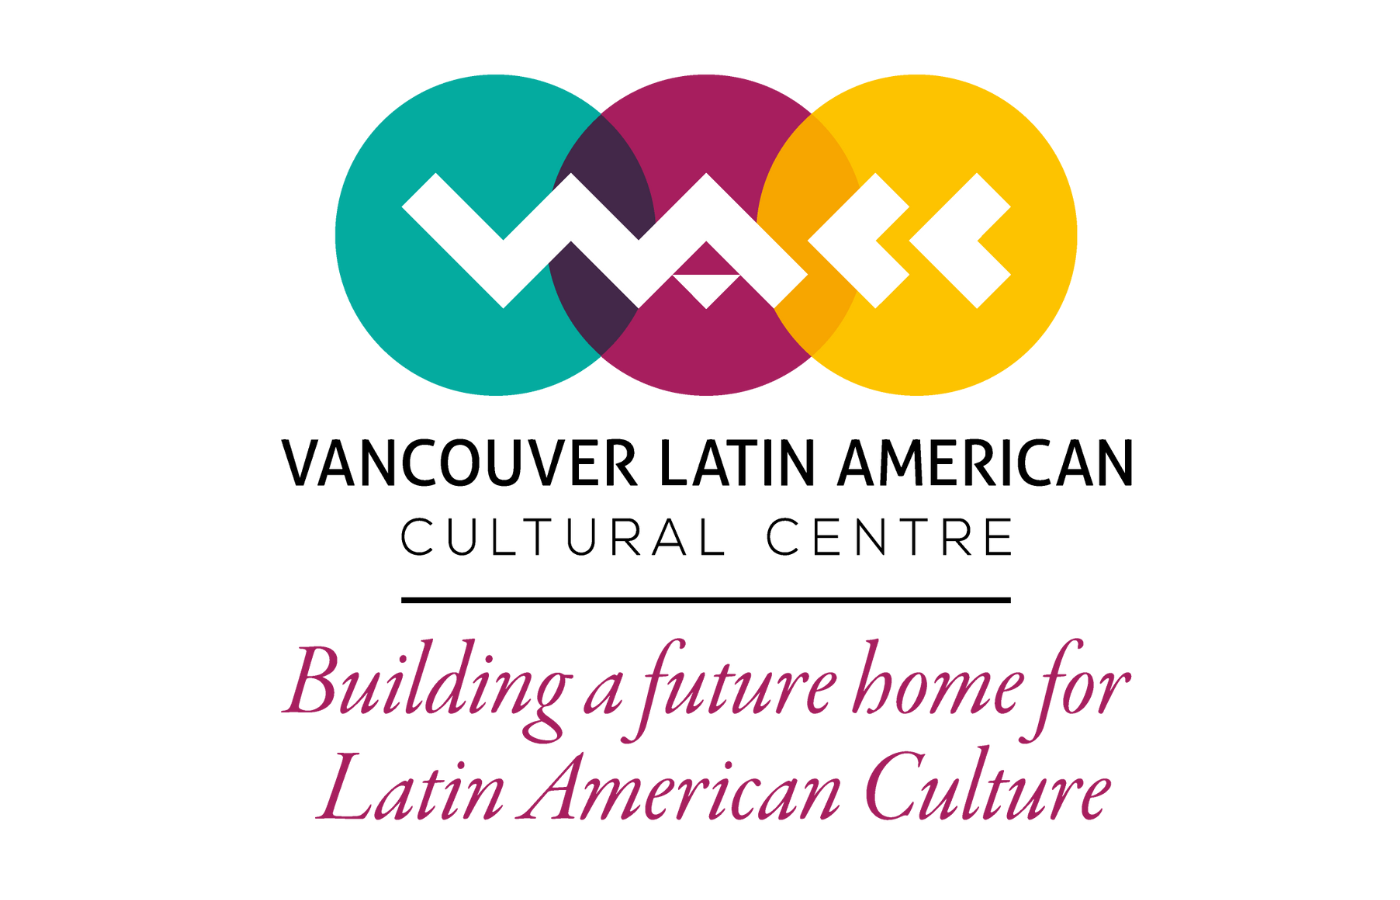 Logo for Vancouver Latin American Cultural Centre, with the tag line "Building a future home for Latin American Culture".